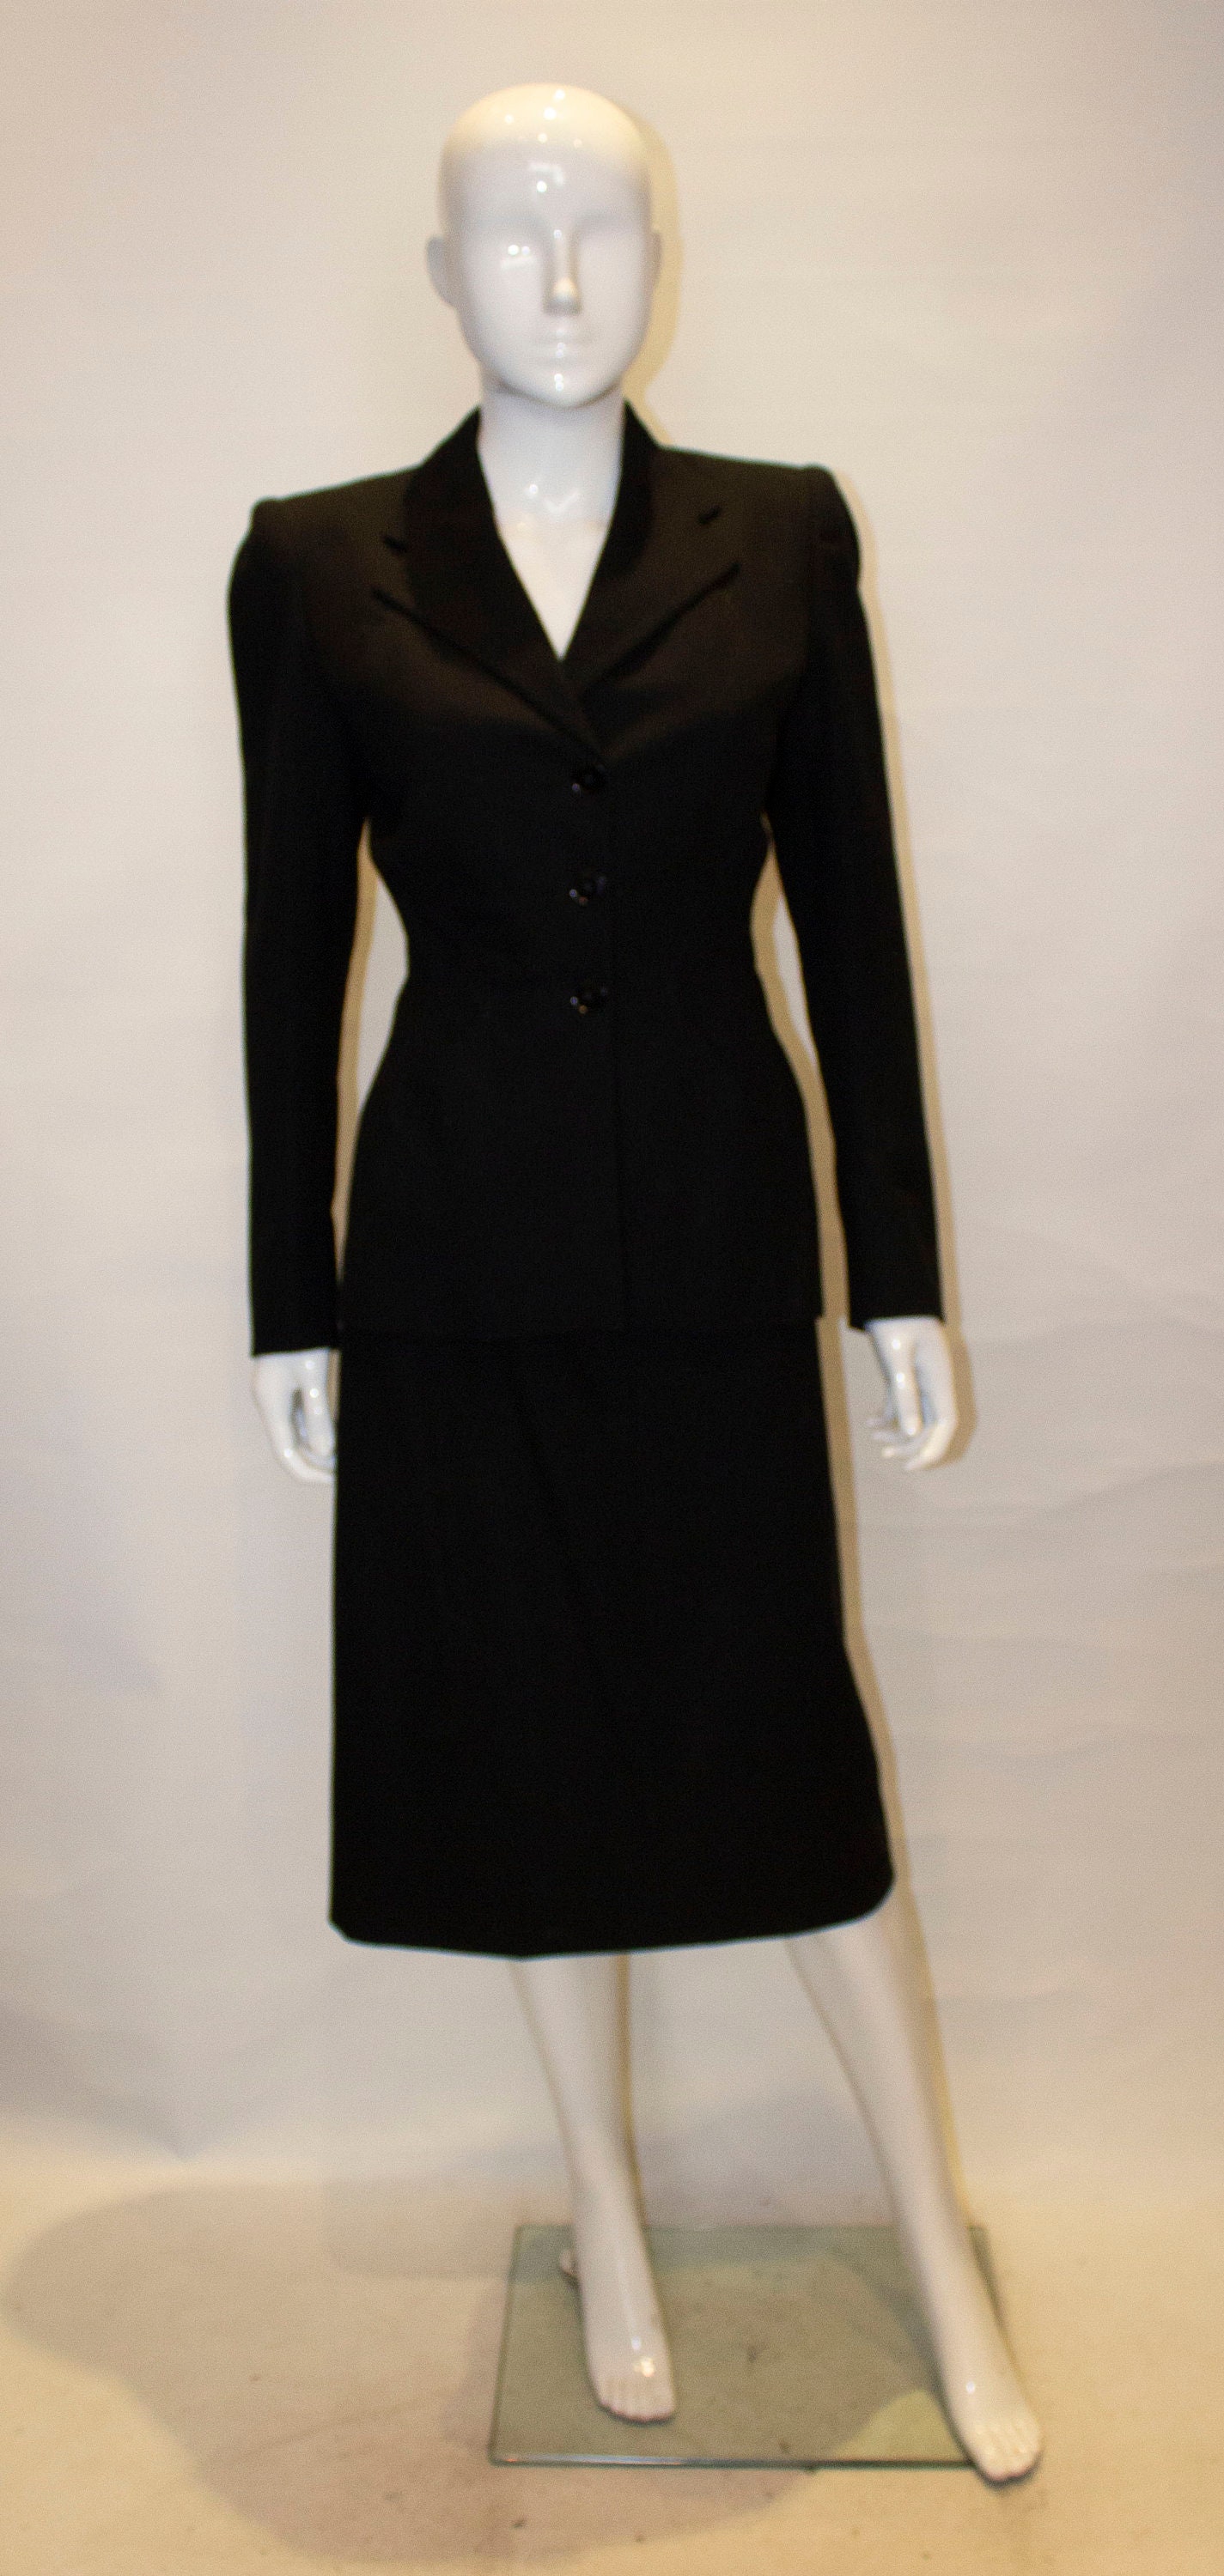 A Vintage 1940s Black Suit by Bradleys of Chepstow Place - Etsy